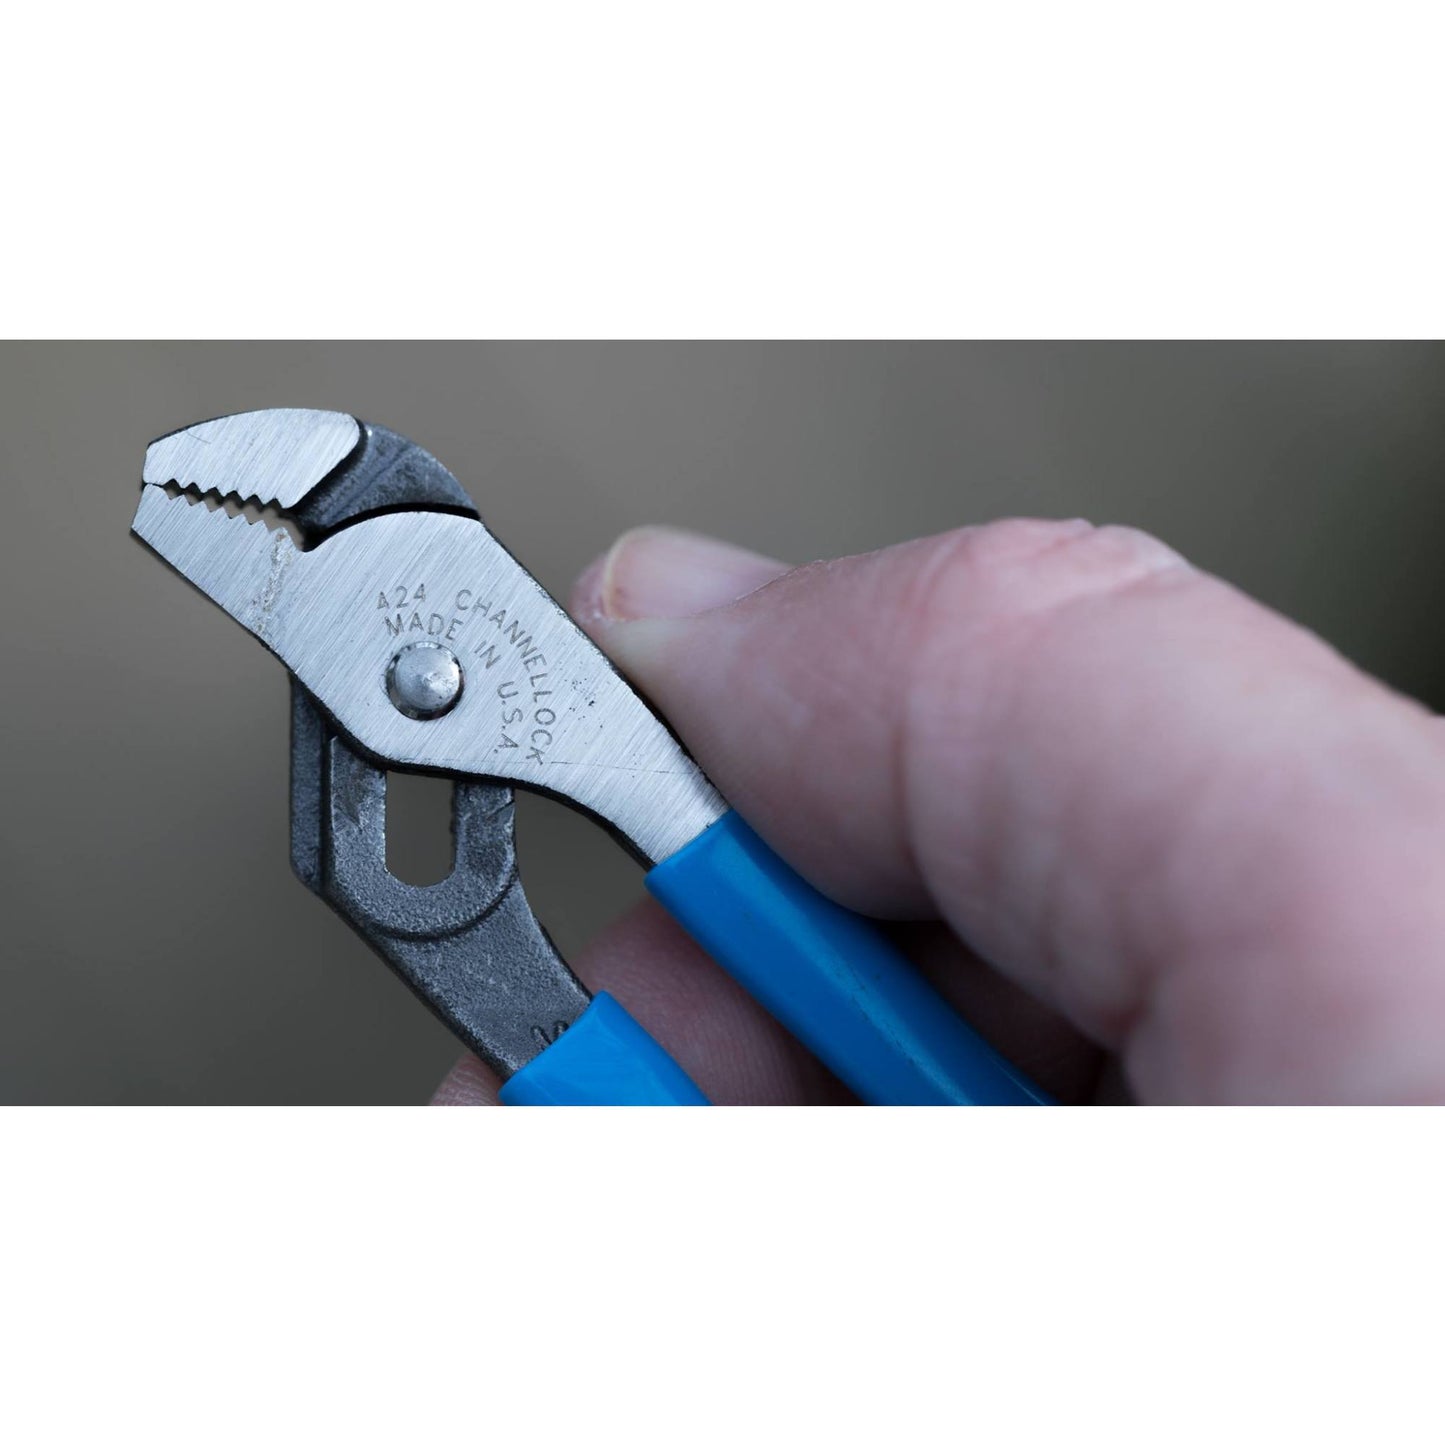 4.5-inch Straight Jaw Tongue & Groove Pliers (424)